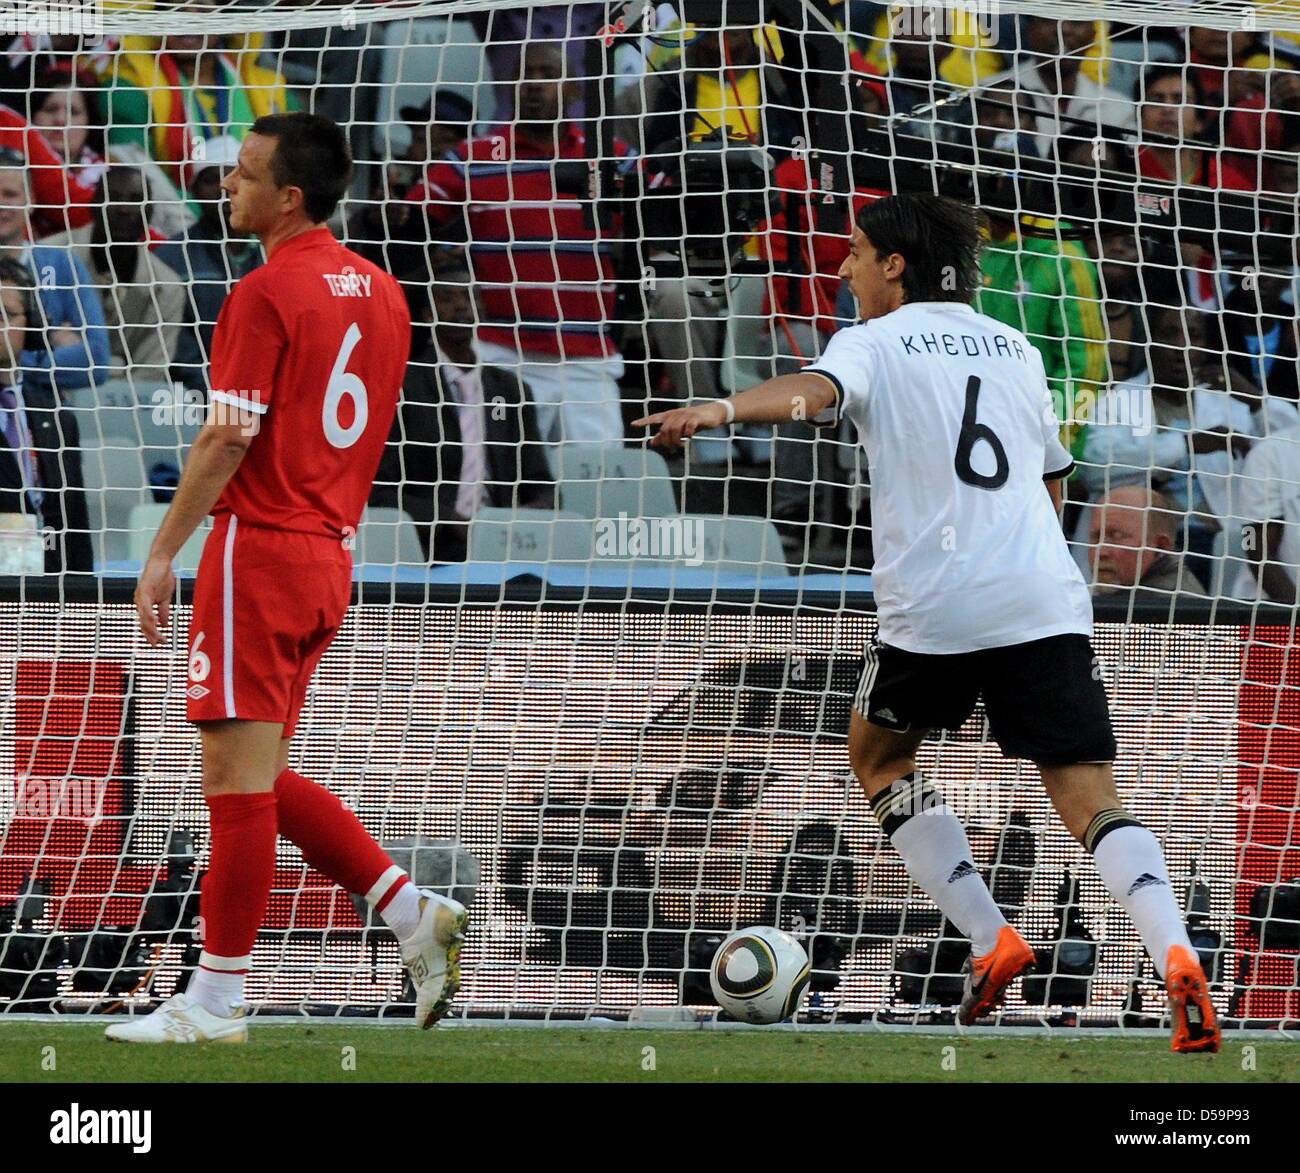 Germany's Sami Khedira celebrates next to England's John Terry during the 2010 FIFA World Cup Round of Sixteen match between Germany and England at the Free State Stadium in Bloemfontein, South Africa 27 June 2010. Photo: Marcus Brandt dpa - Please refer to http://dpaq.de/FIFA-WM2010-TC Stock Photo